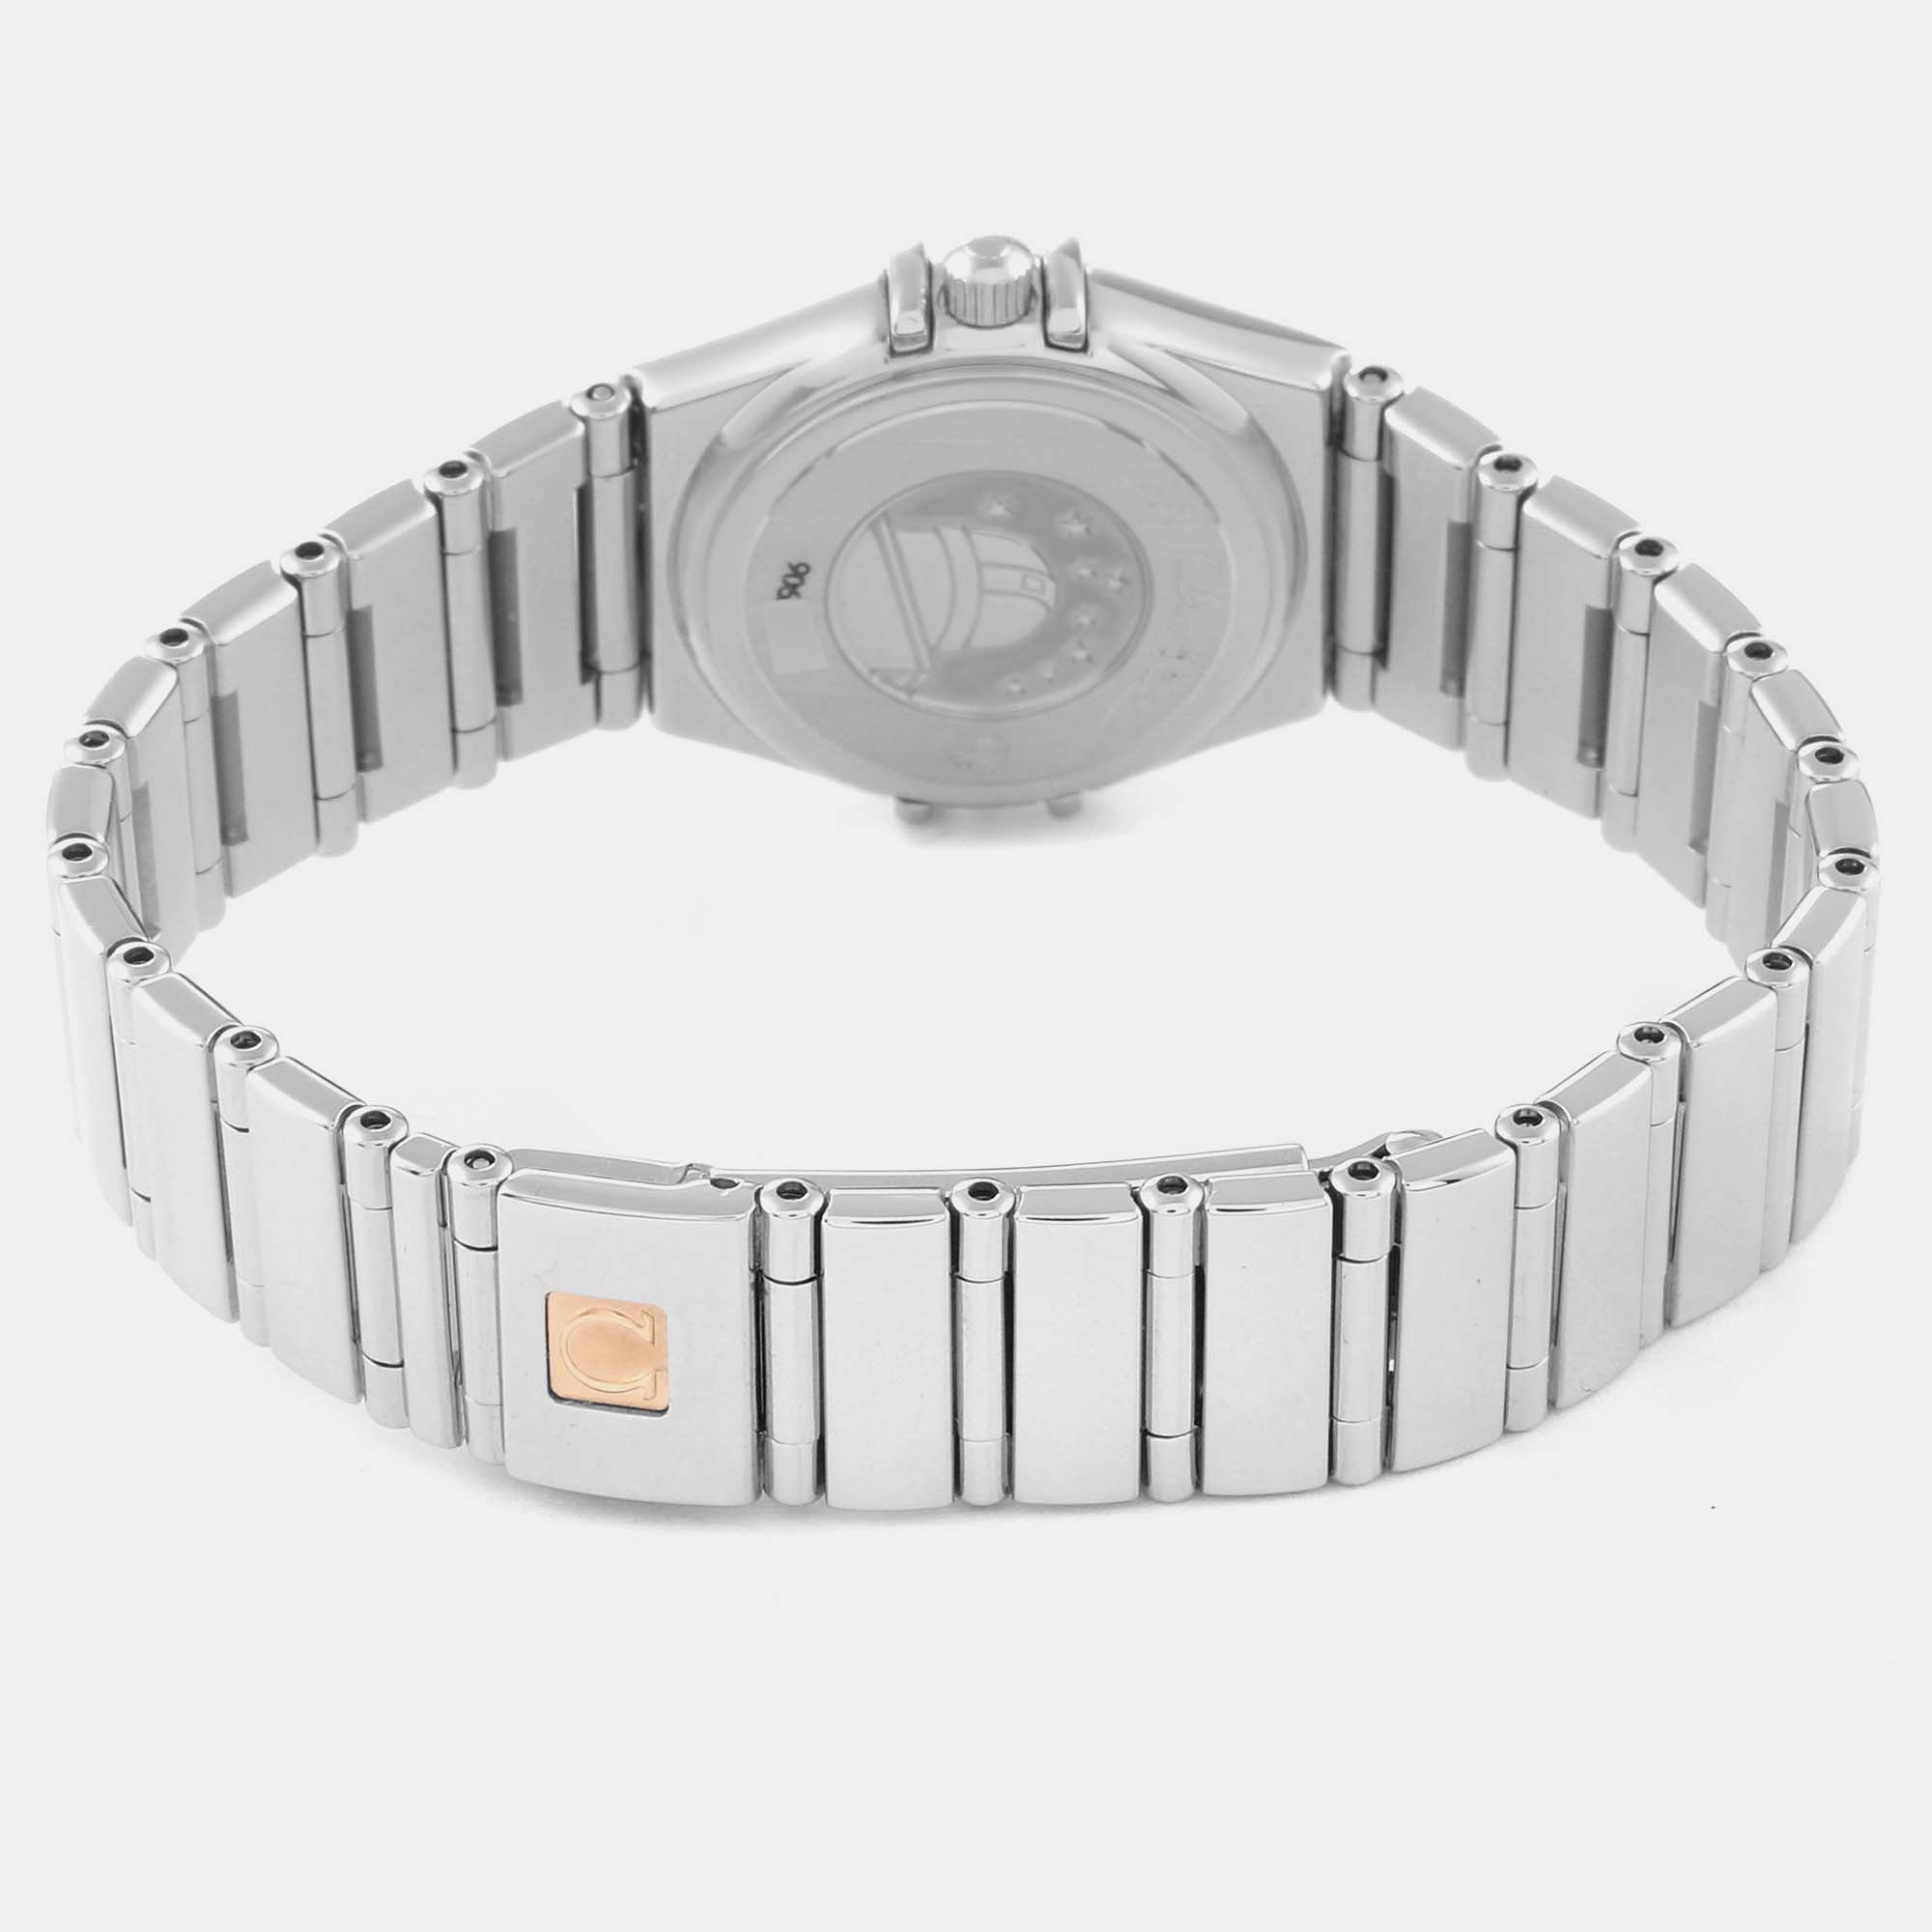 Omega Mother Of Pearl Diamond Stainless Steel Constellation 1465.79.00 Quartz Women's Wristwatch 22.5 Mm